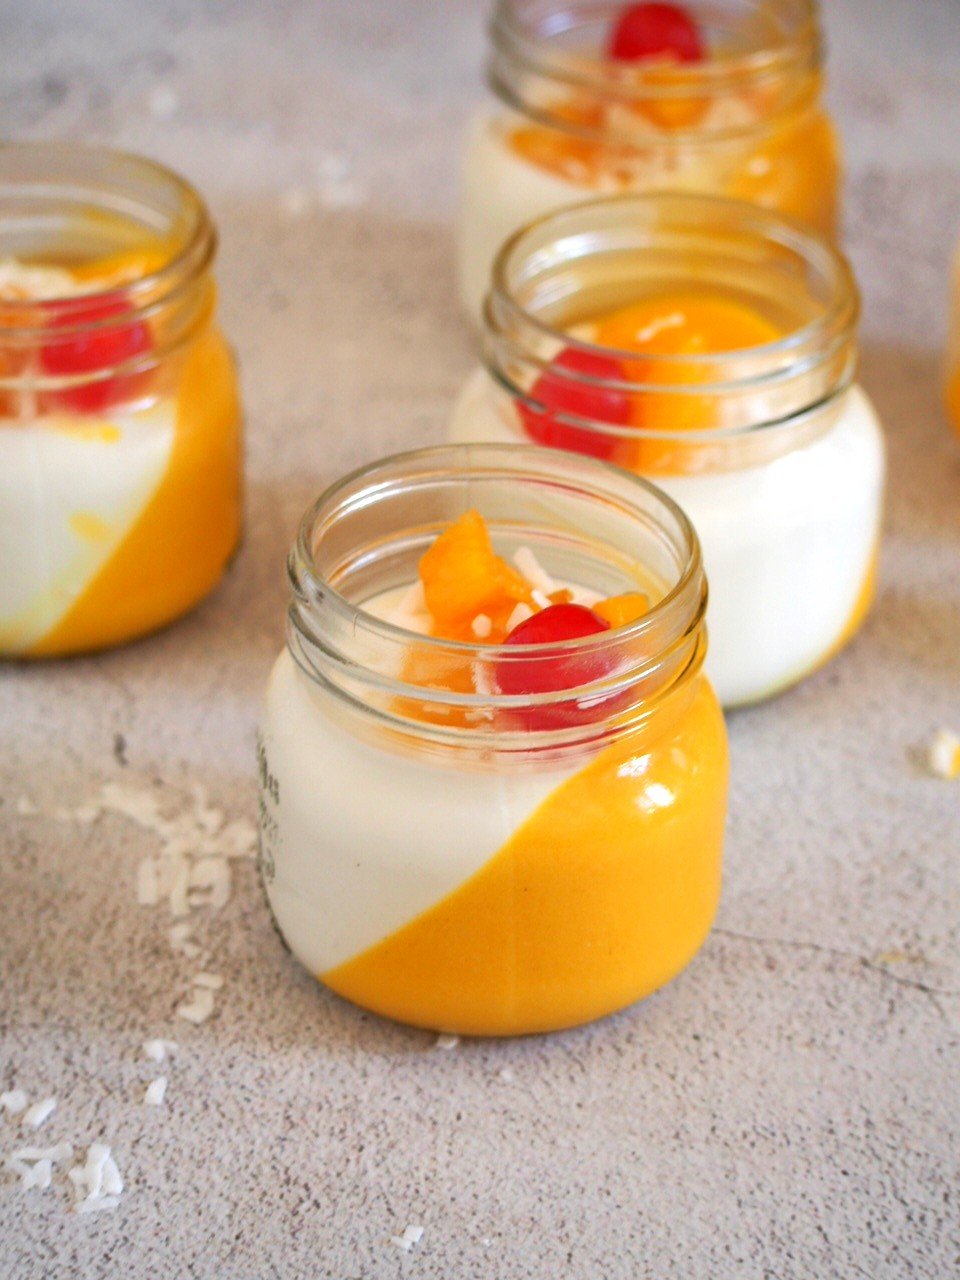 Coconut Mango panna cotta in jars, with cherries, caramelized mangoes and flaked coconut on top.